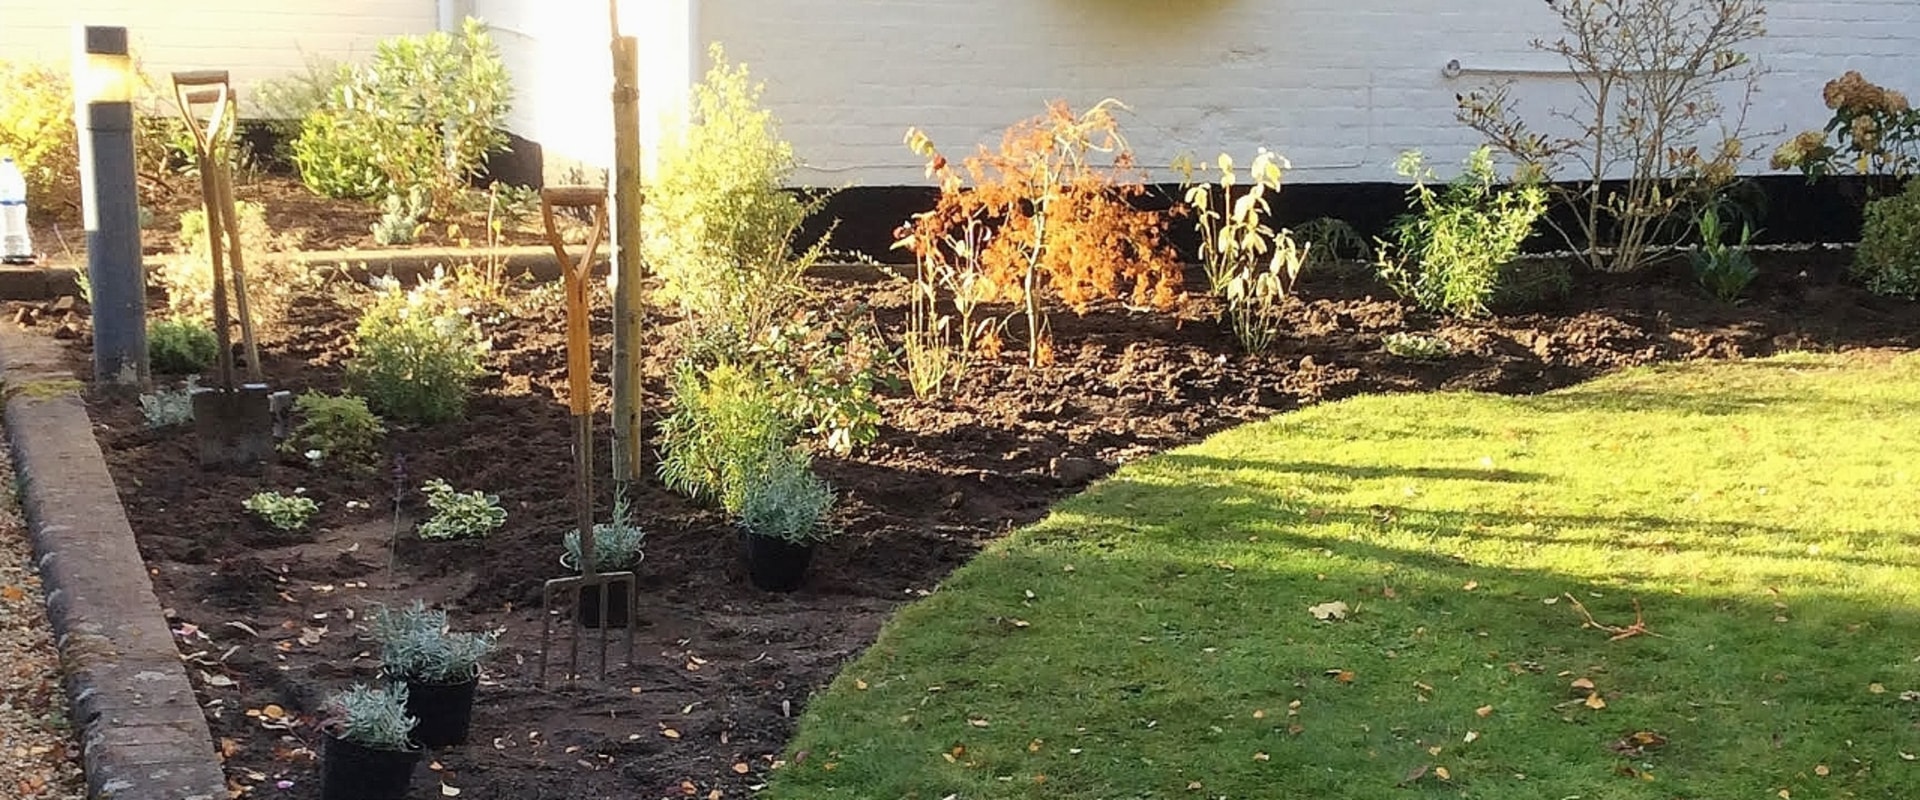 What do you need to know to prep your garden area?